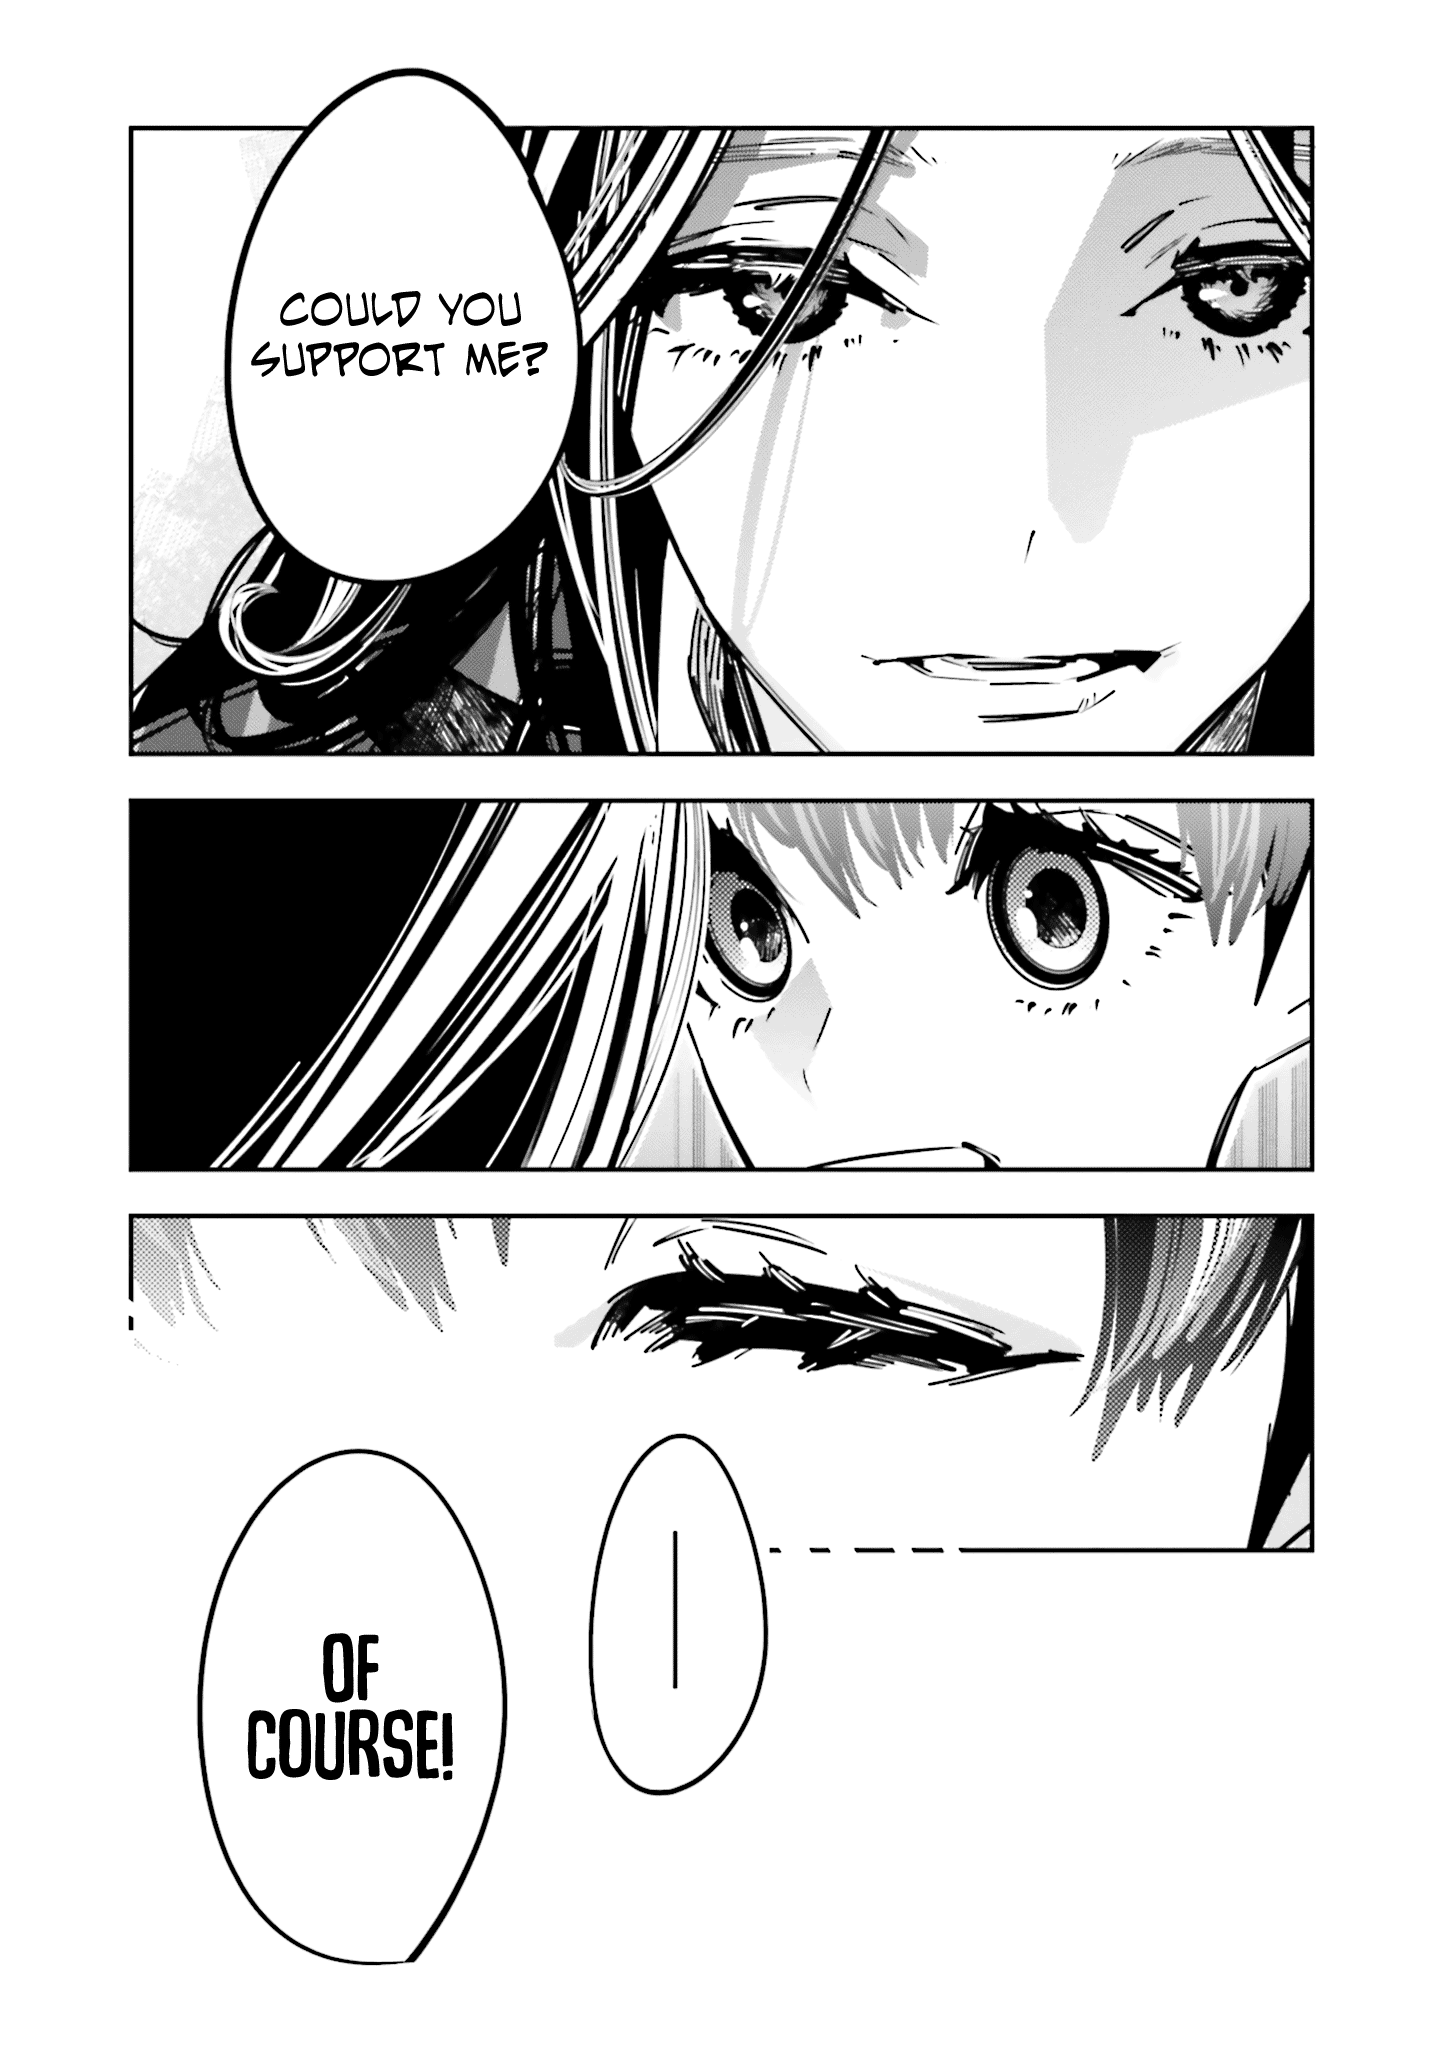 I Reincarnated As The Little Sister Of A Death Game Manga's Murder Mastermind And Failed Chapter 10 #9